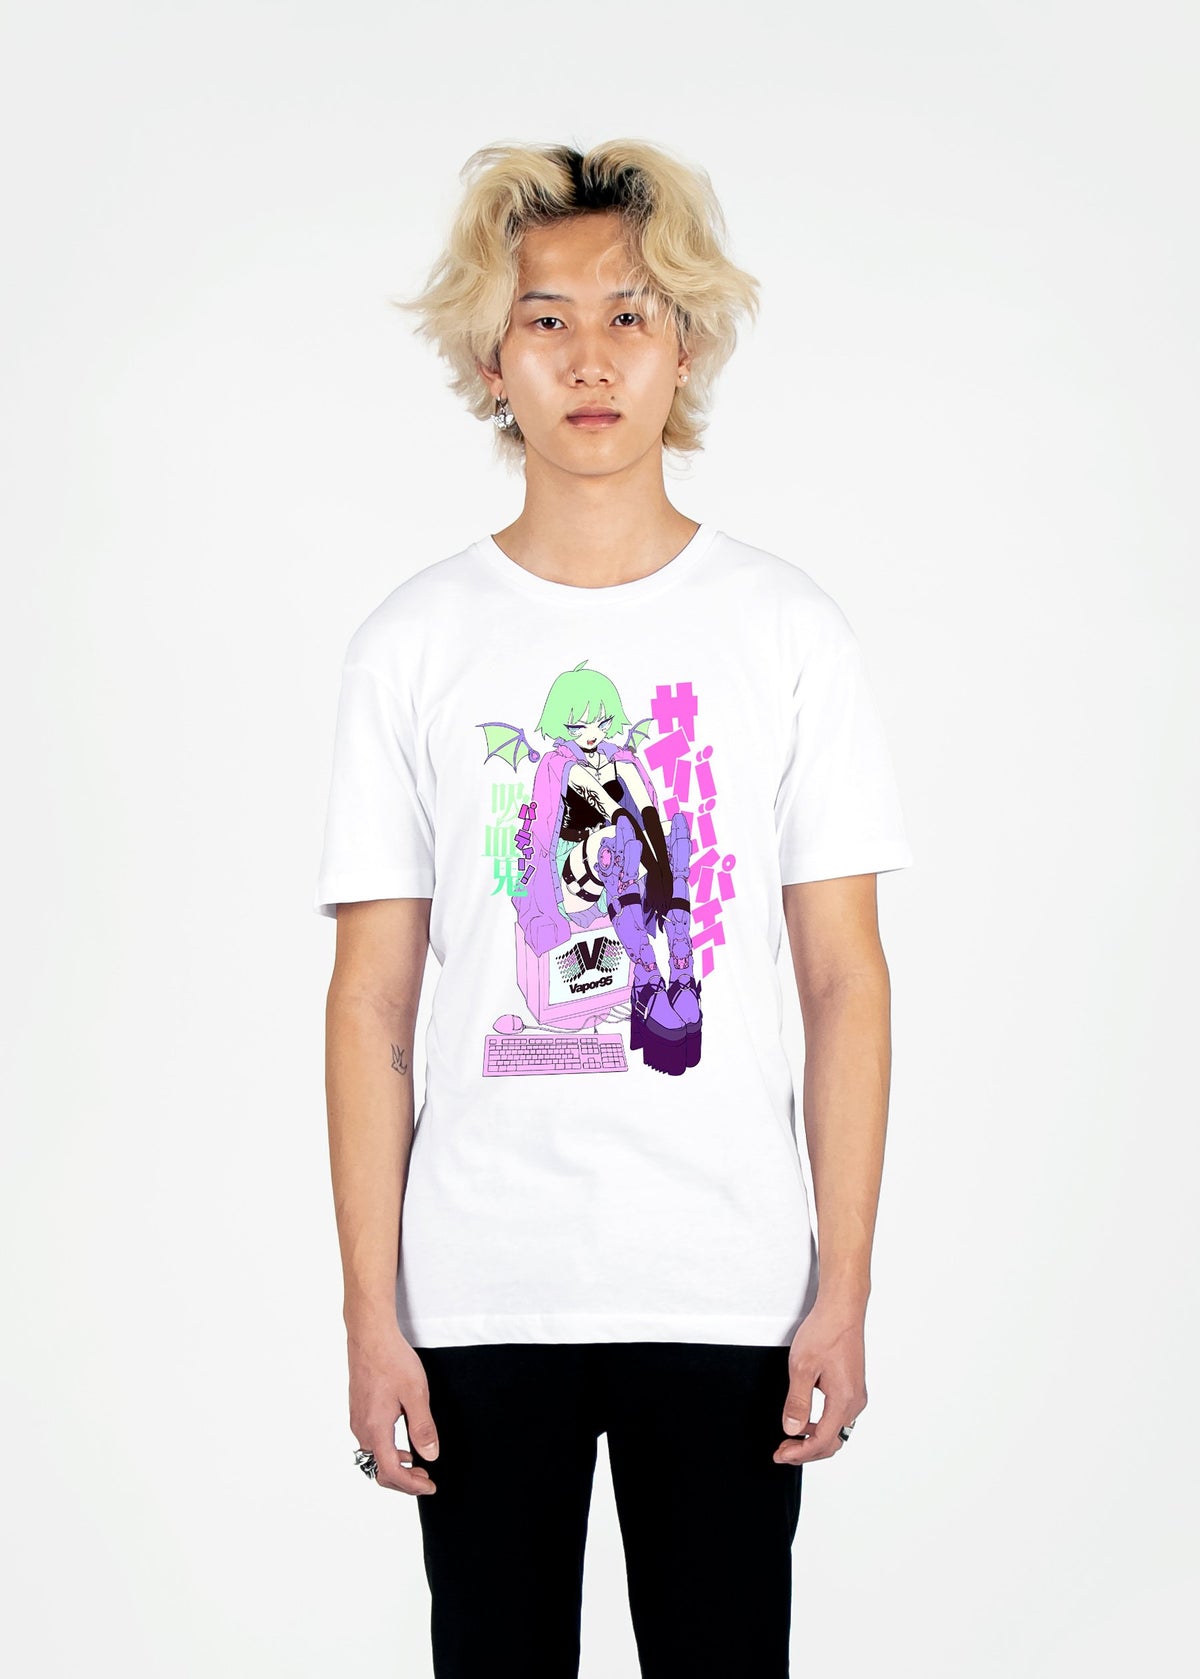 Experience Aesthetic and Vaporwave fashion with Vapor95's Graphic Tees ...